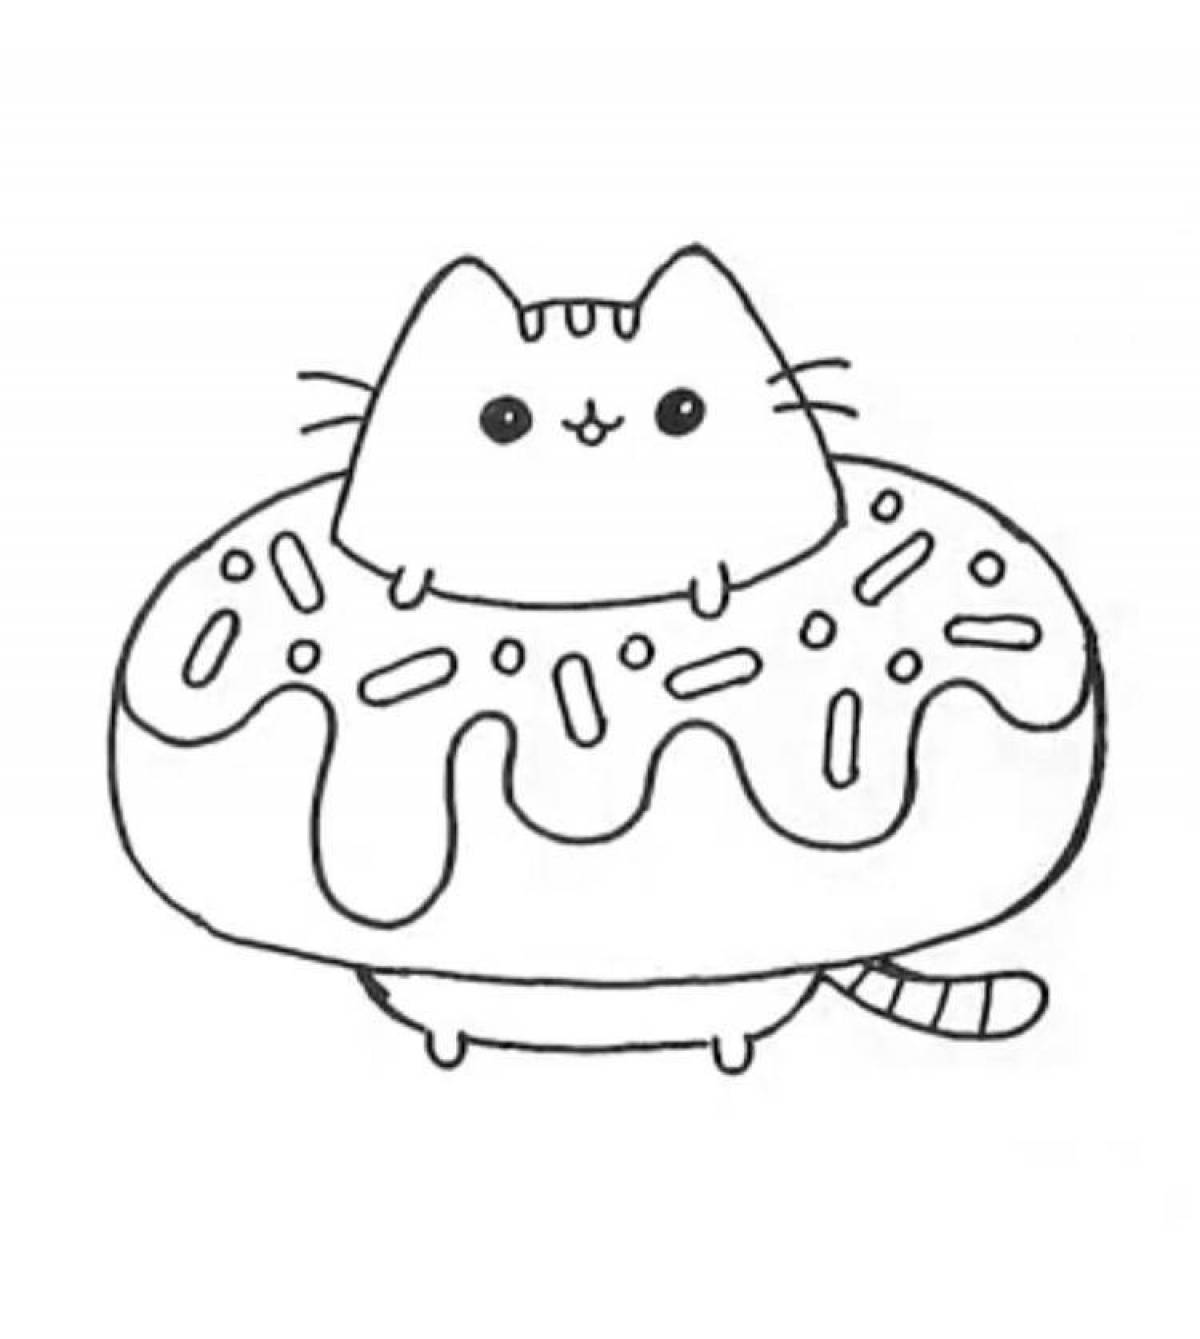 Rampant donut cat coloring page